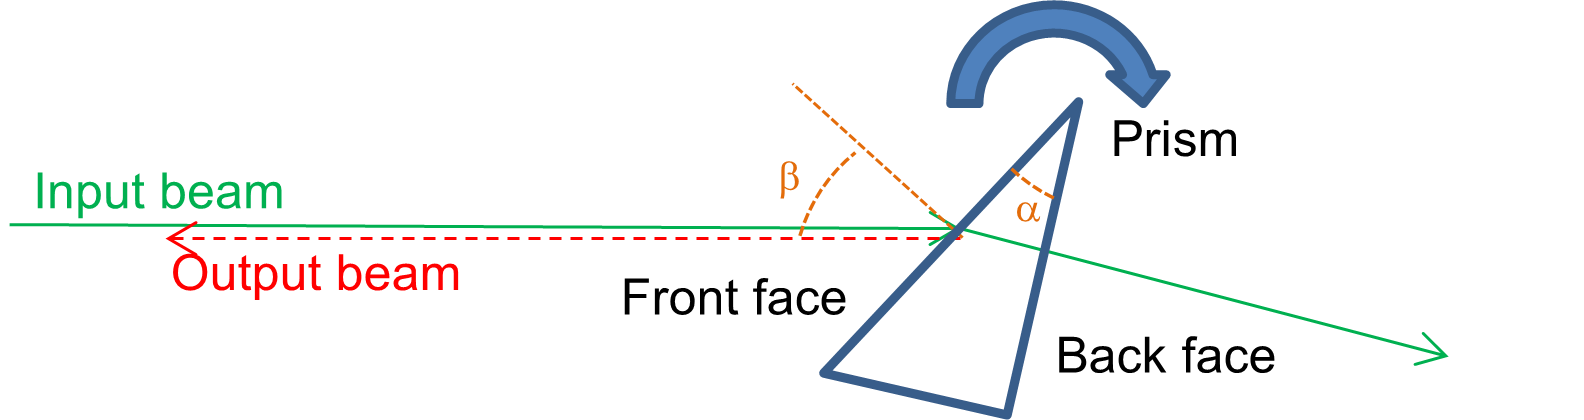 diagram image showing an input and output beam, refracting, transmitting, and reflecting back through a prism for refractive index calculation